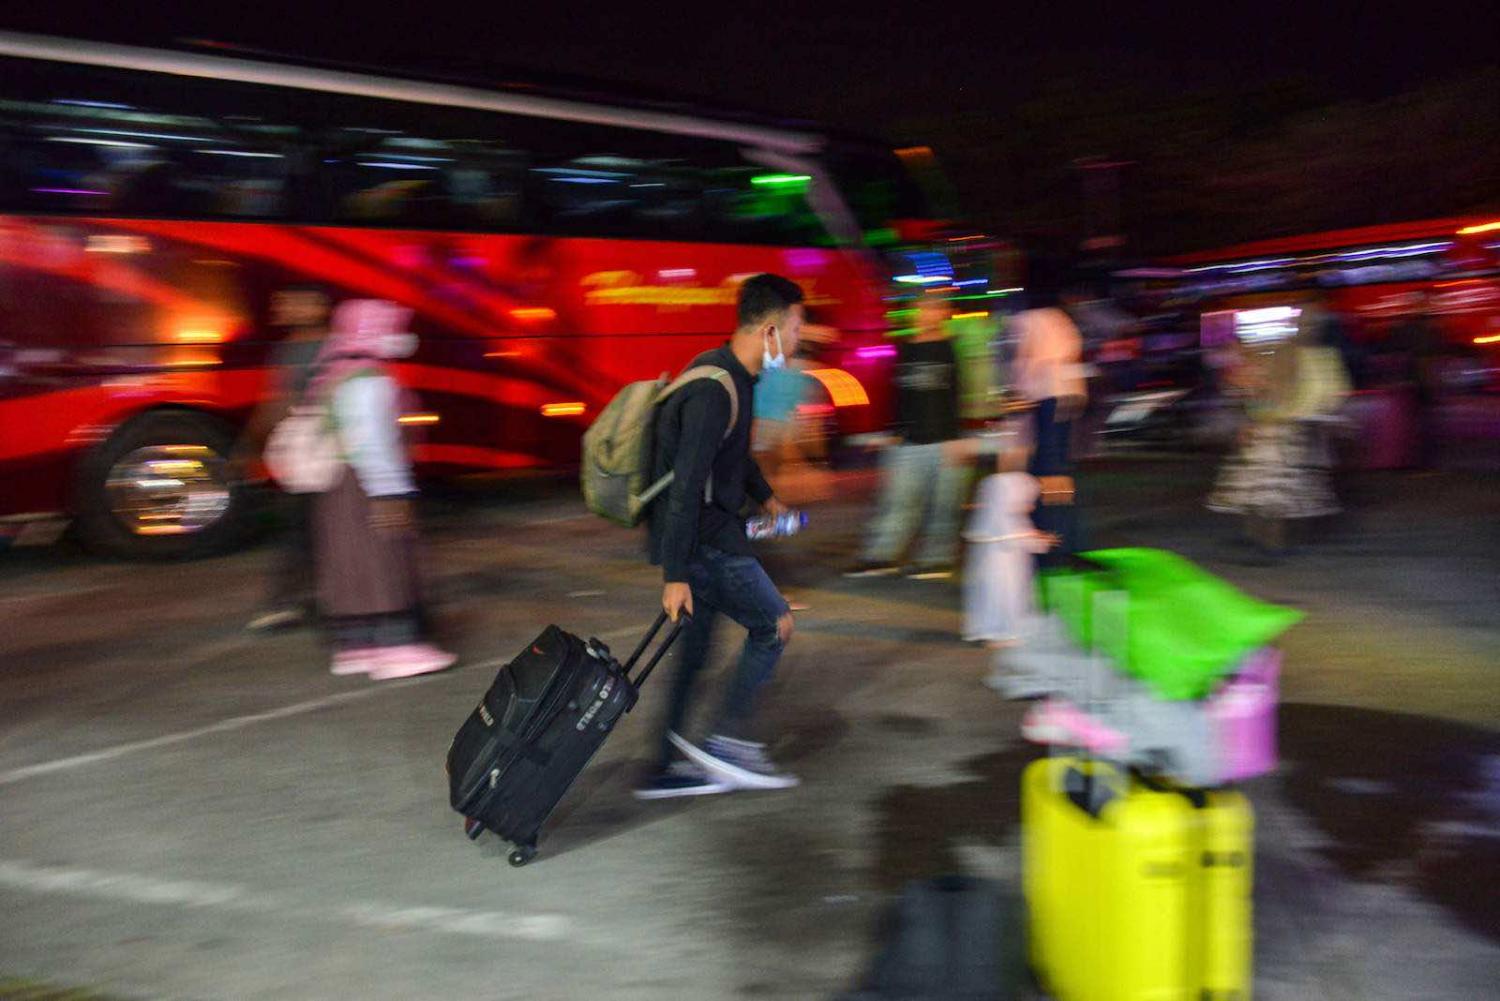 Passengers gather at a bus station during the homecoming, or mudik, ahead of the Eid al-Fitr celebrations in Banda Aceh, 3 May 2021 (Chaideer Mahyuddin/AFP via Getty Images)